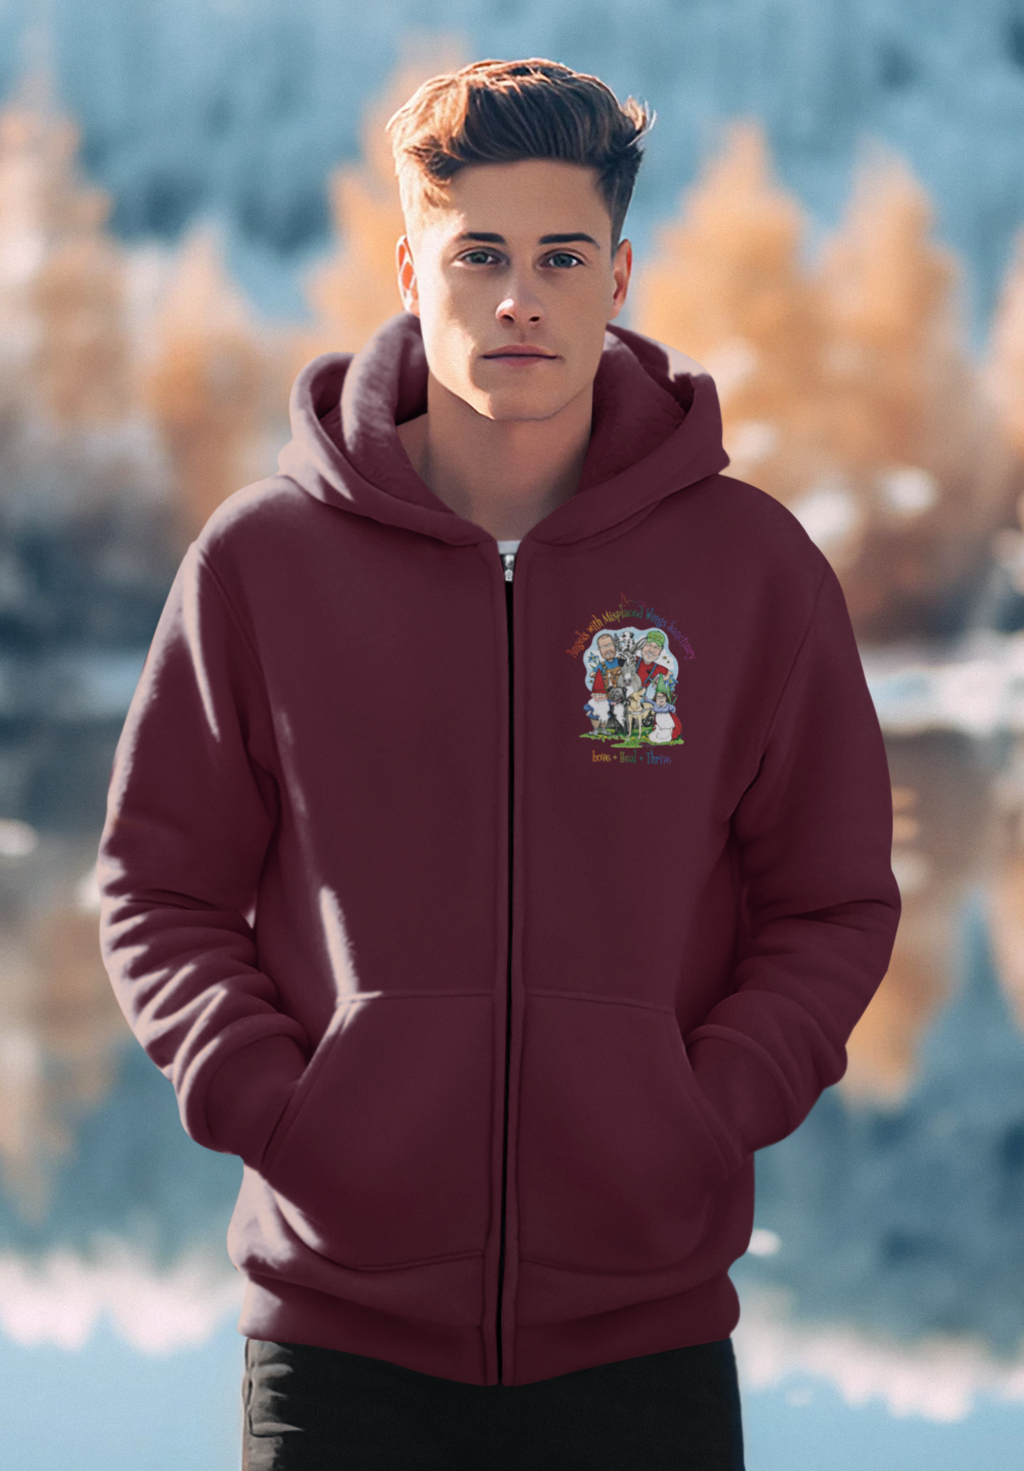 Angels With Misplaced Wings Zip Up Fleece Hoodie (available in several colors)